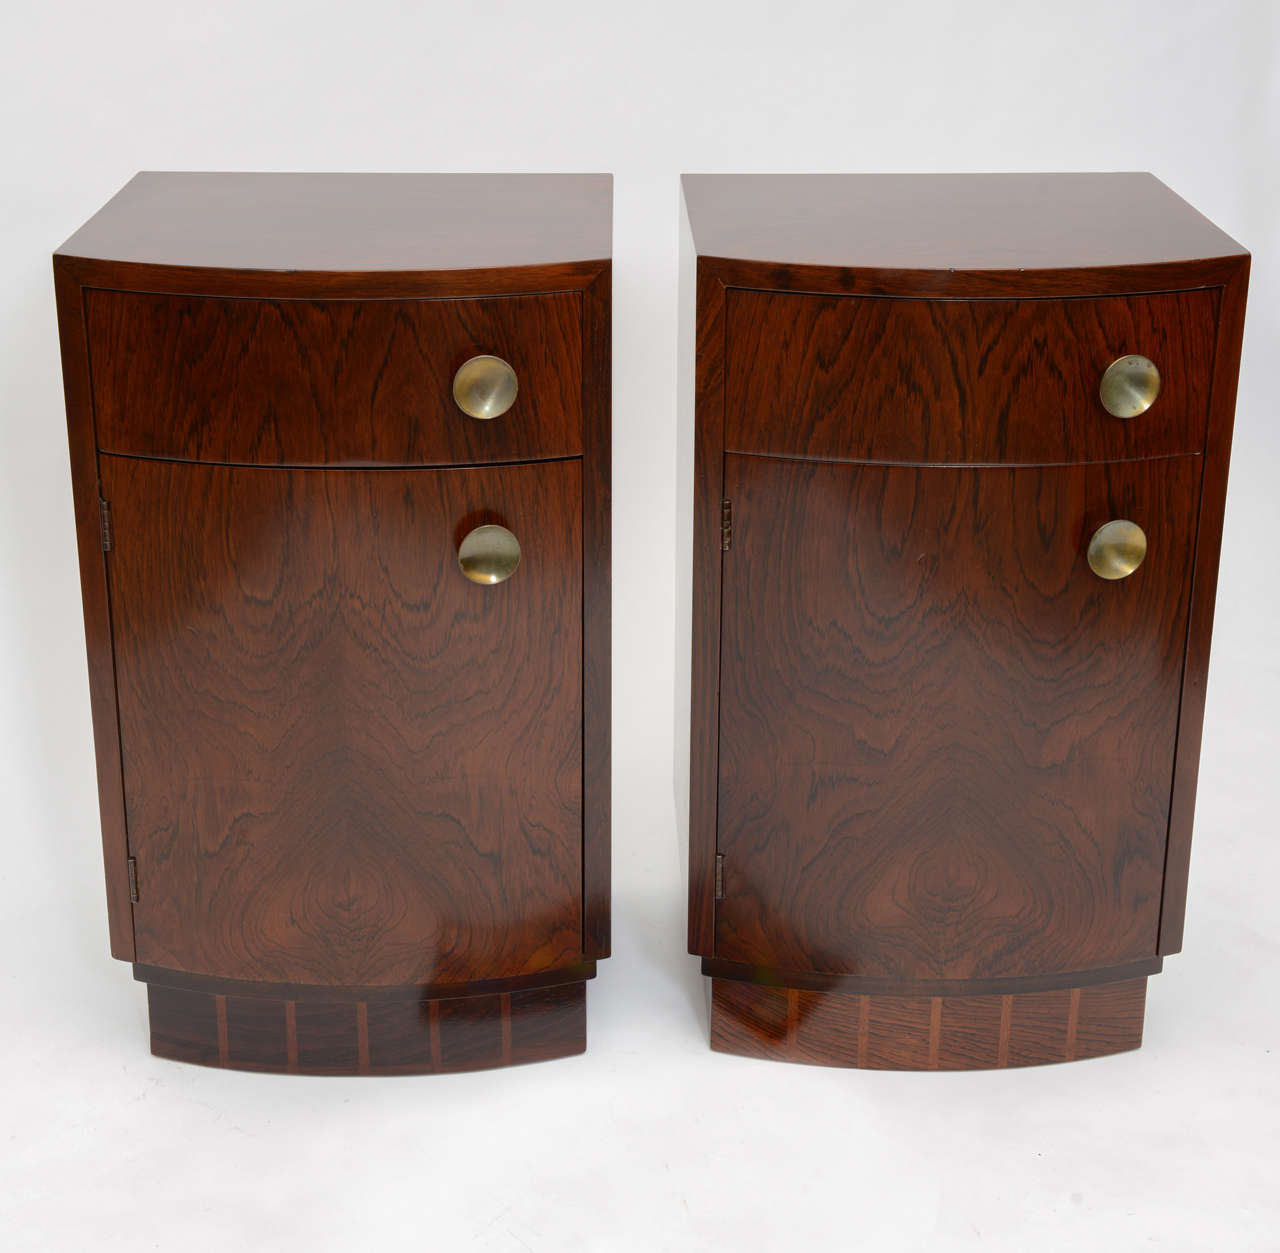 A practical pair of nightstands in brazilian rosewood,
designed by Gilbert Rohde model # 3770